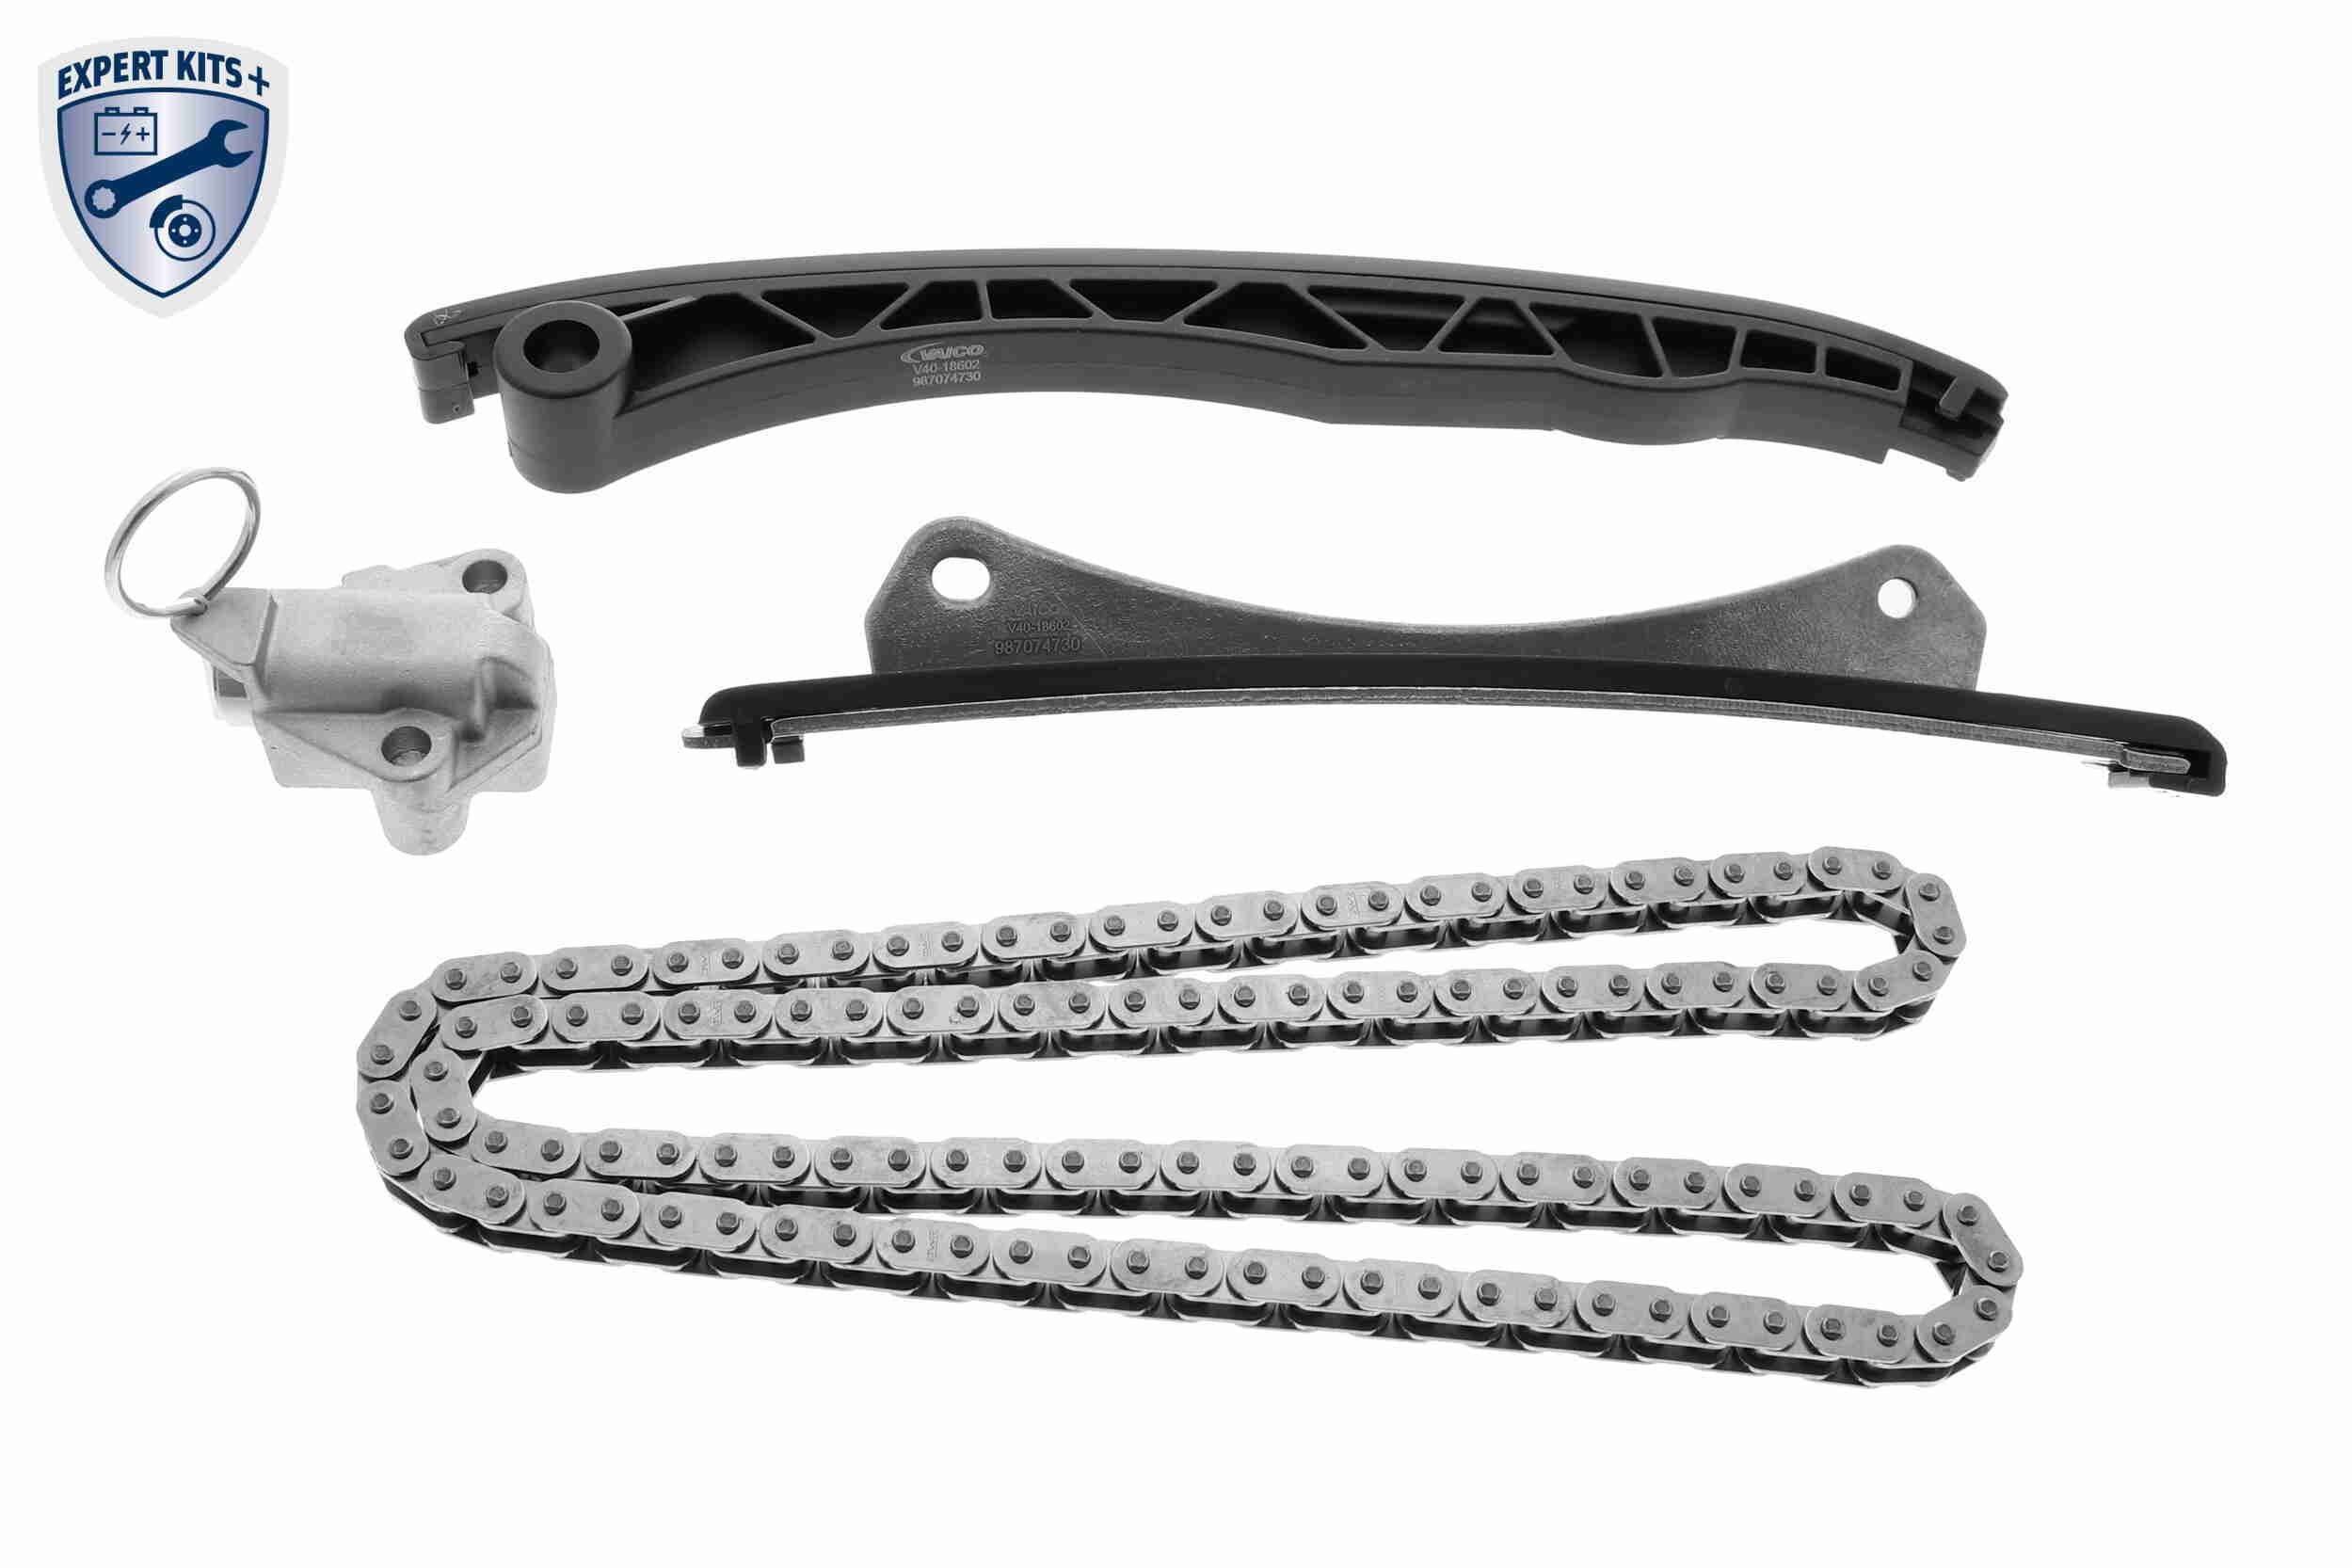 VAICO V40-10006-BEK Timing chain kit with slide rails, with chain tensioner, for camshaft, without bolts/screws, Simplex, Closed chain, EXPERT KITS +